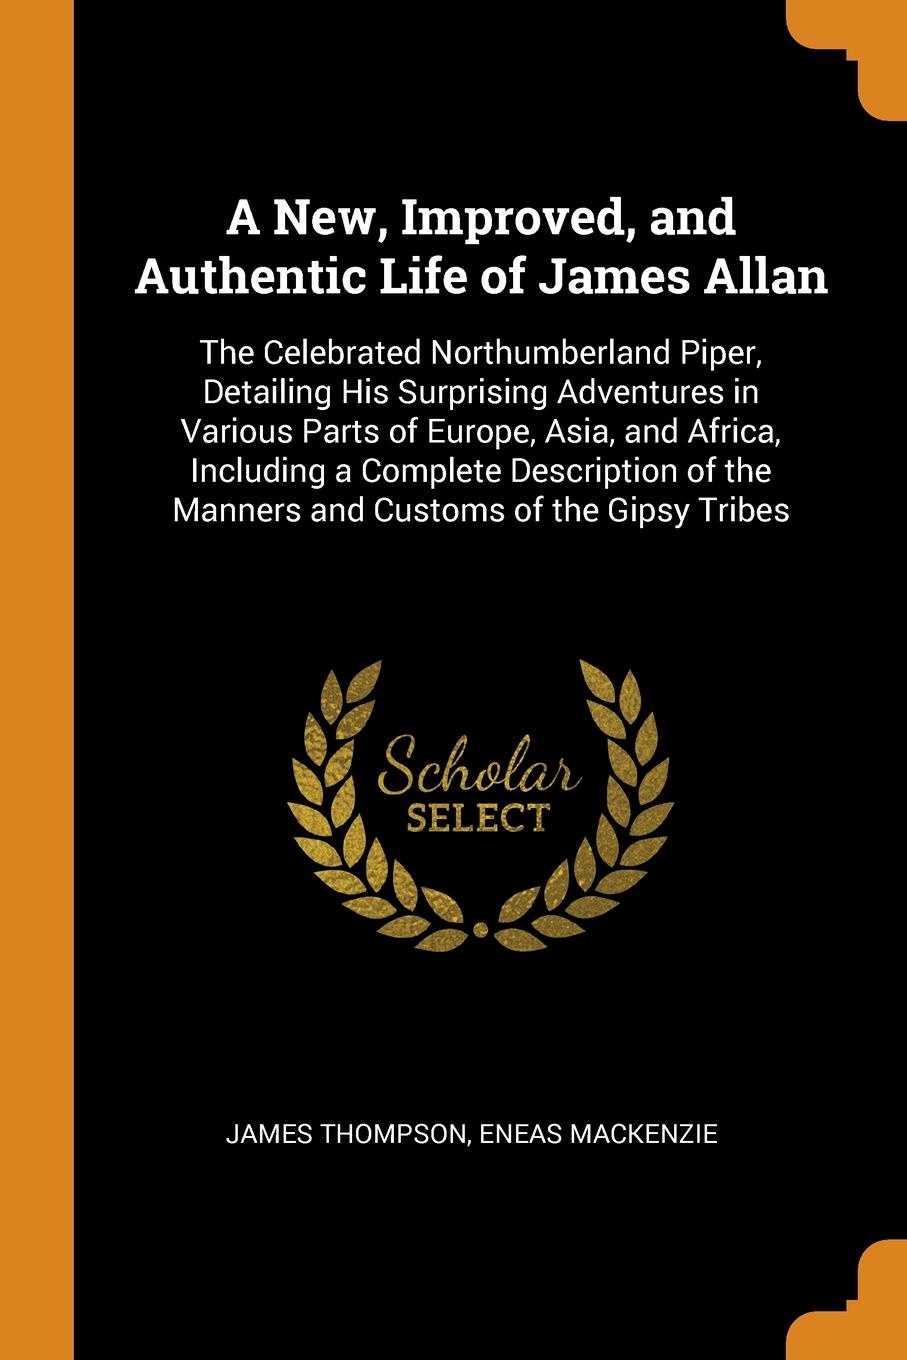 A New, Improved, and Authentic Life of James Allan. The Celebrated Northumberland Piper, Detailing His Surprising Adventures in Various Parts of Europe, Asia, and Africa, Including a Complete Description of the Manners and Customs of the Gipsy Tribes